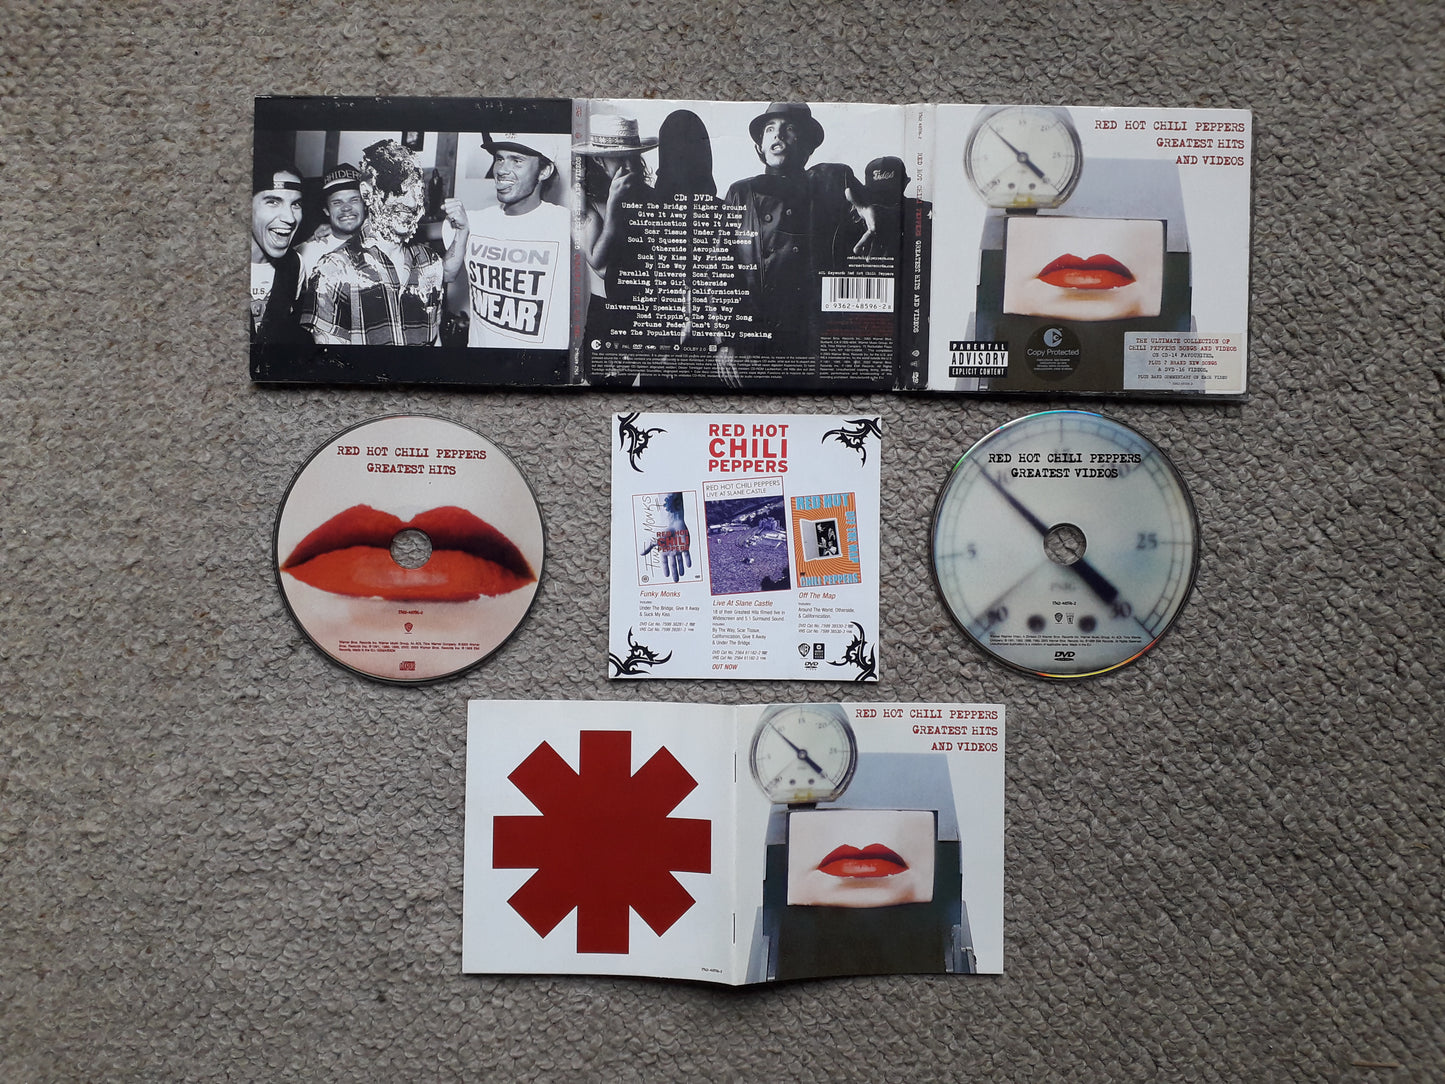 Red Hot Chili Peppers-Greatest Hits & Videos CD & DVD (9362 48596-2)